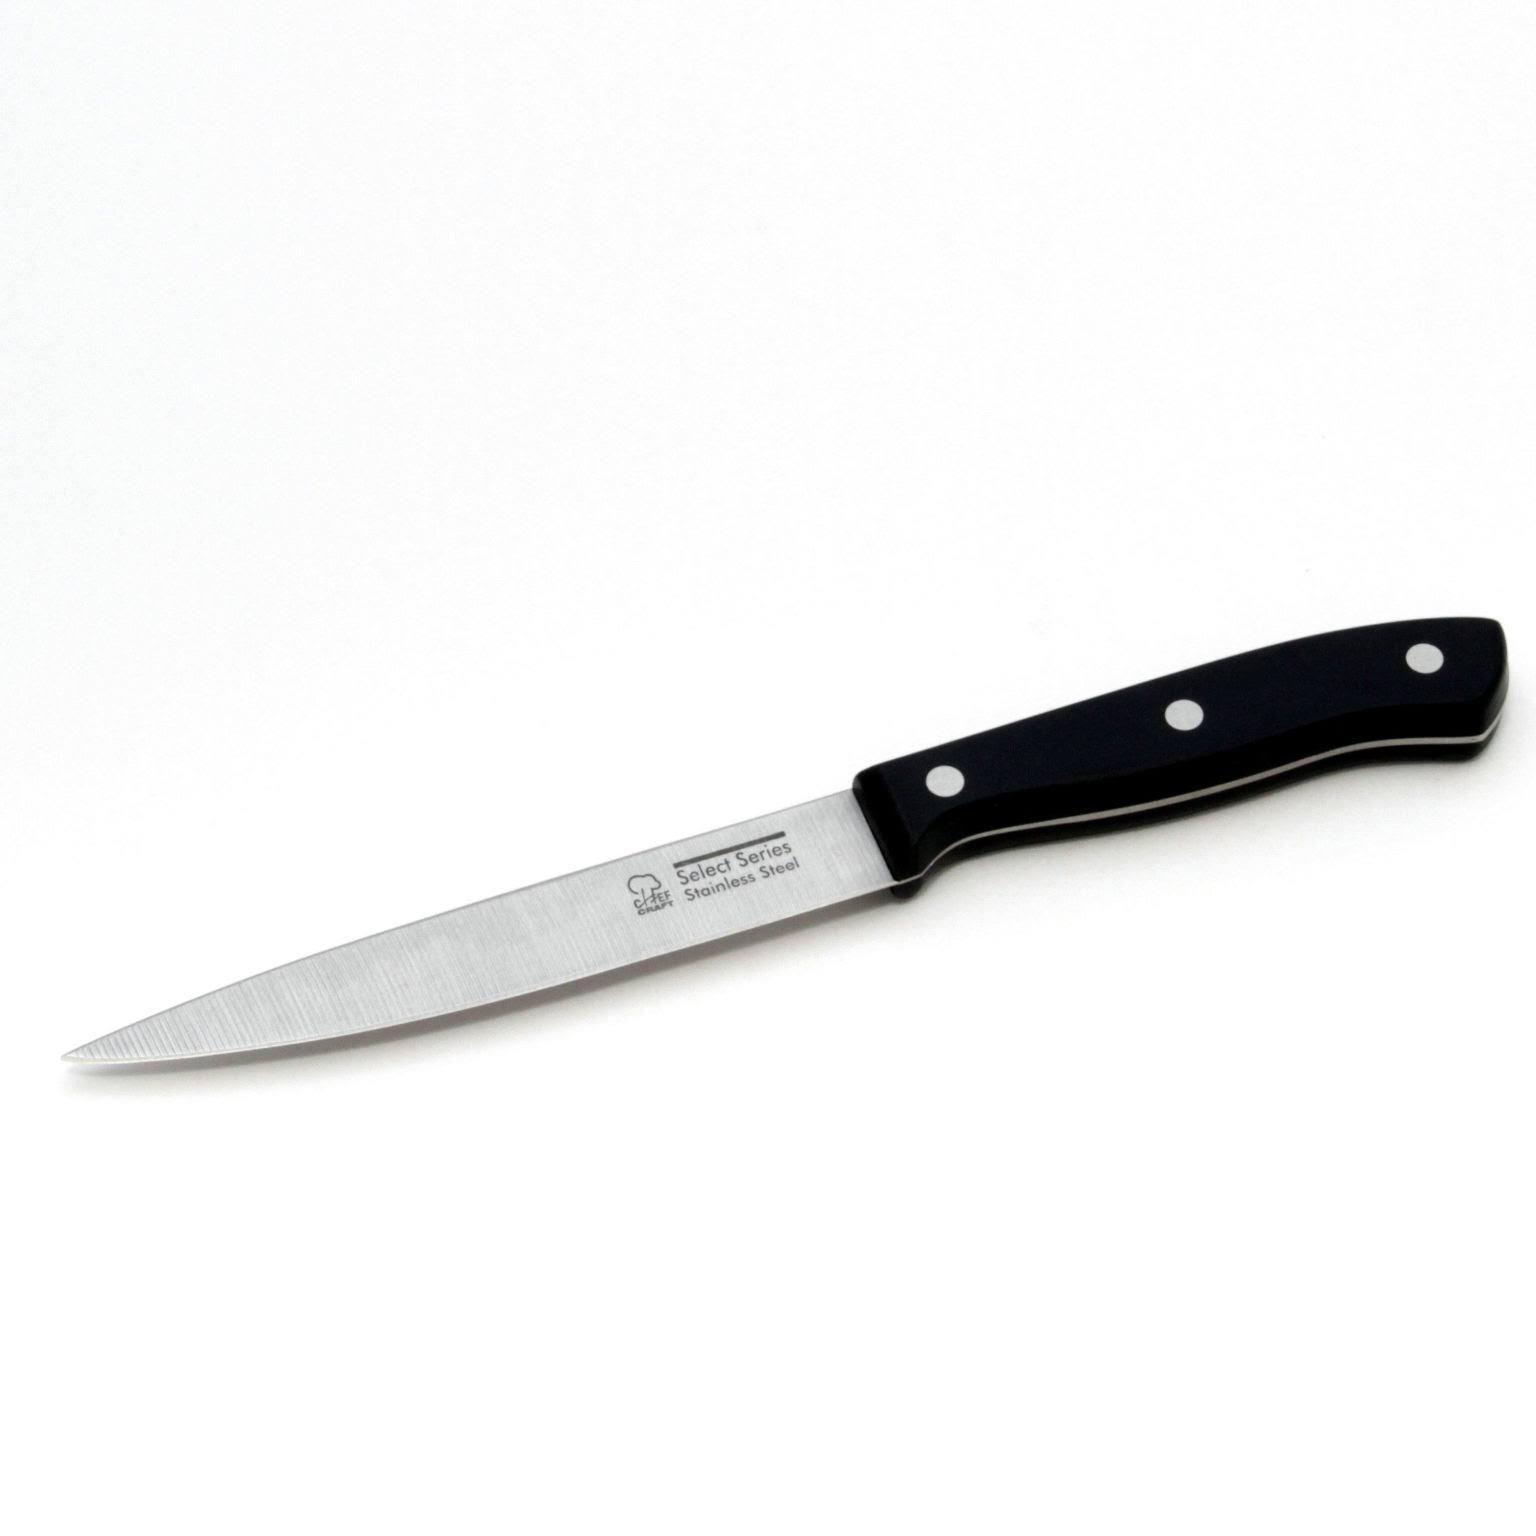 Chef Craft 21667 Select Series Utility Knife - 4 1/2" Blade